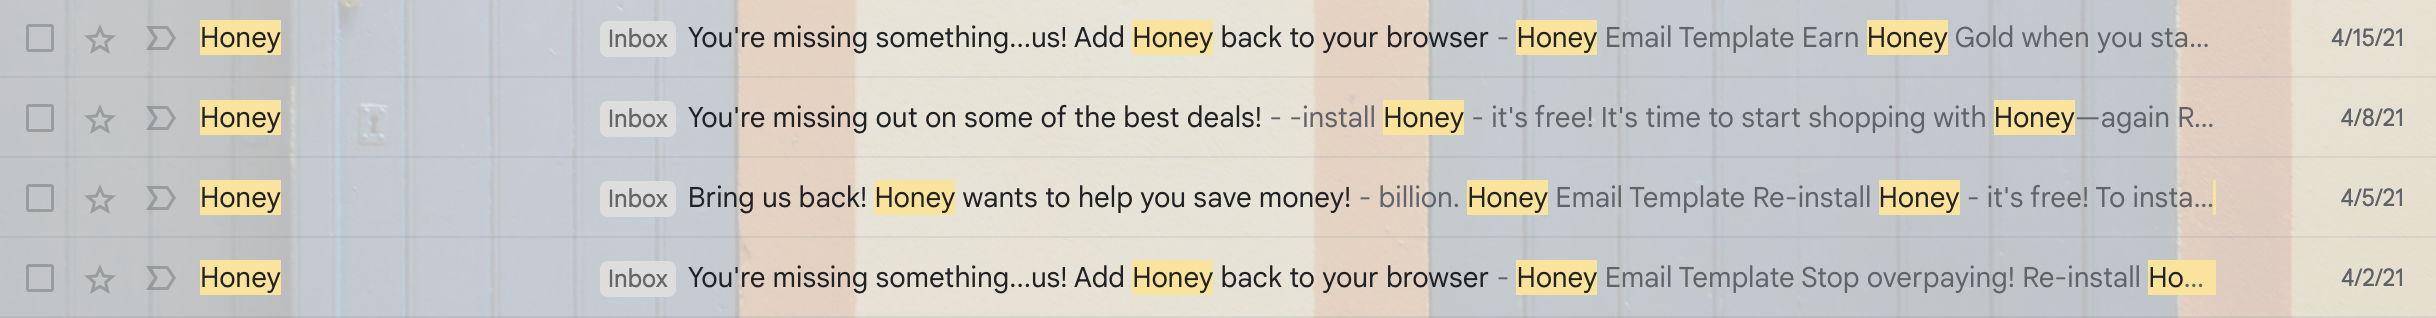 Honey drip campaign in Gmail 